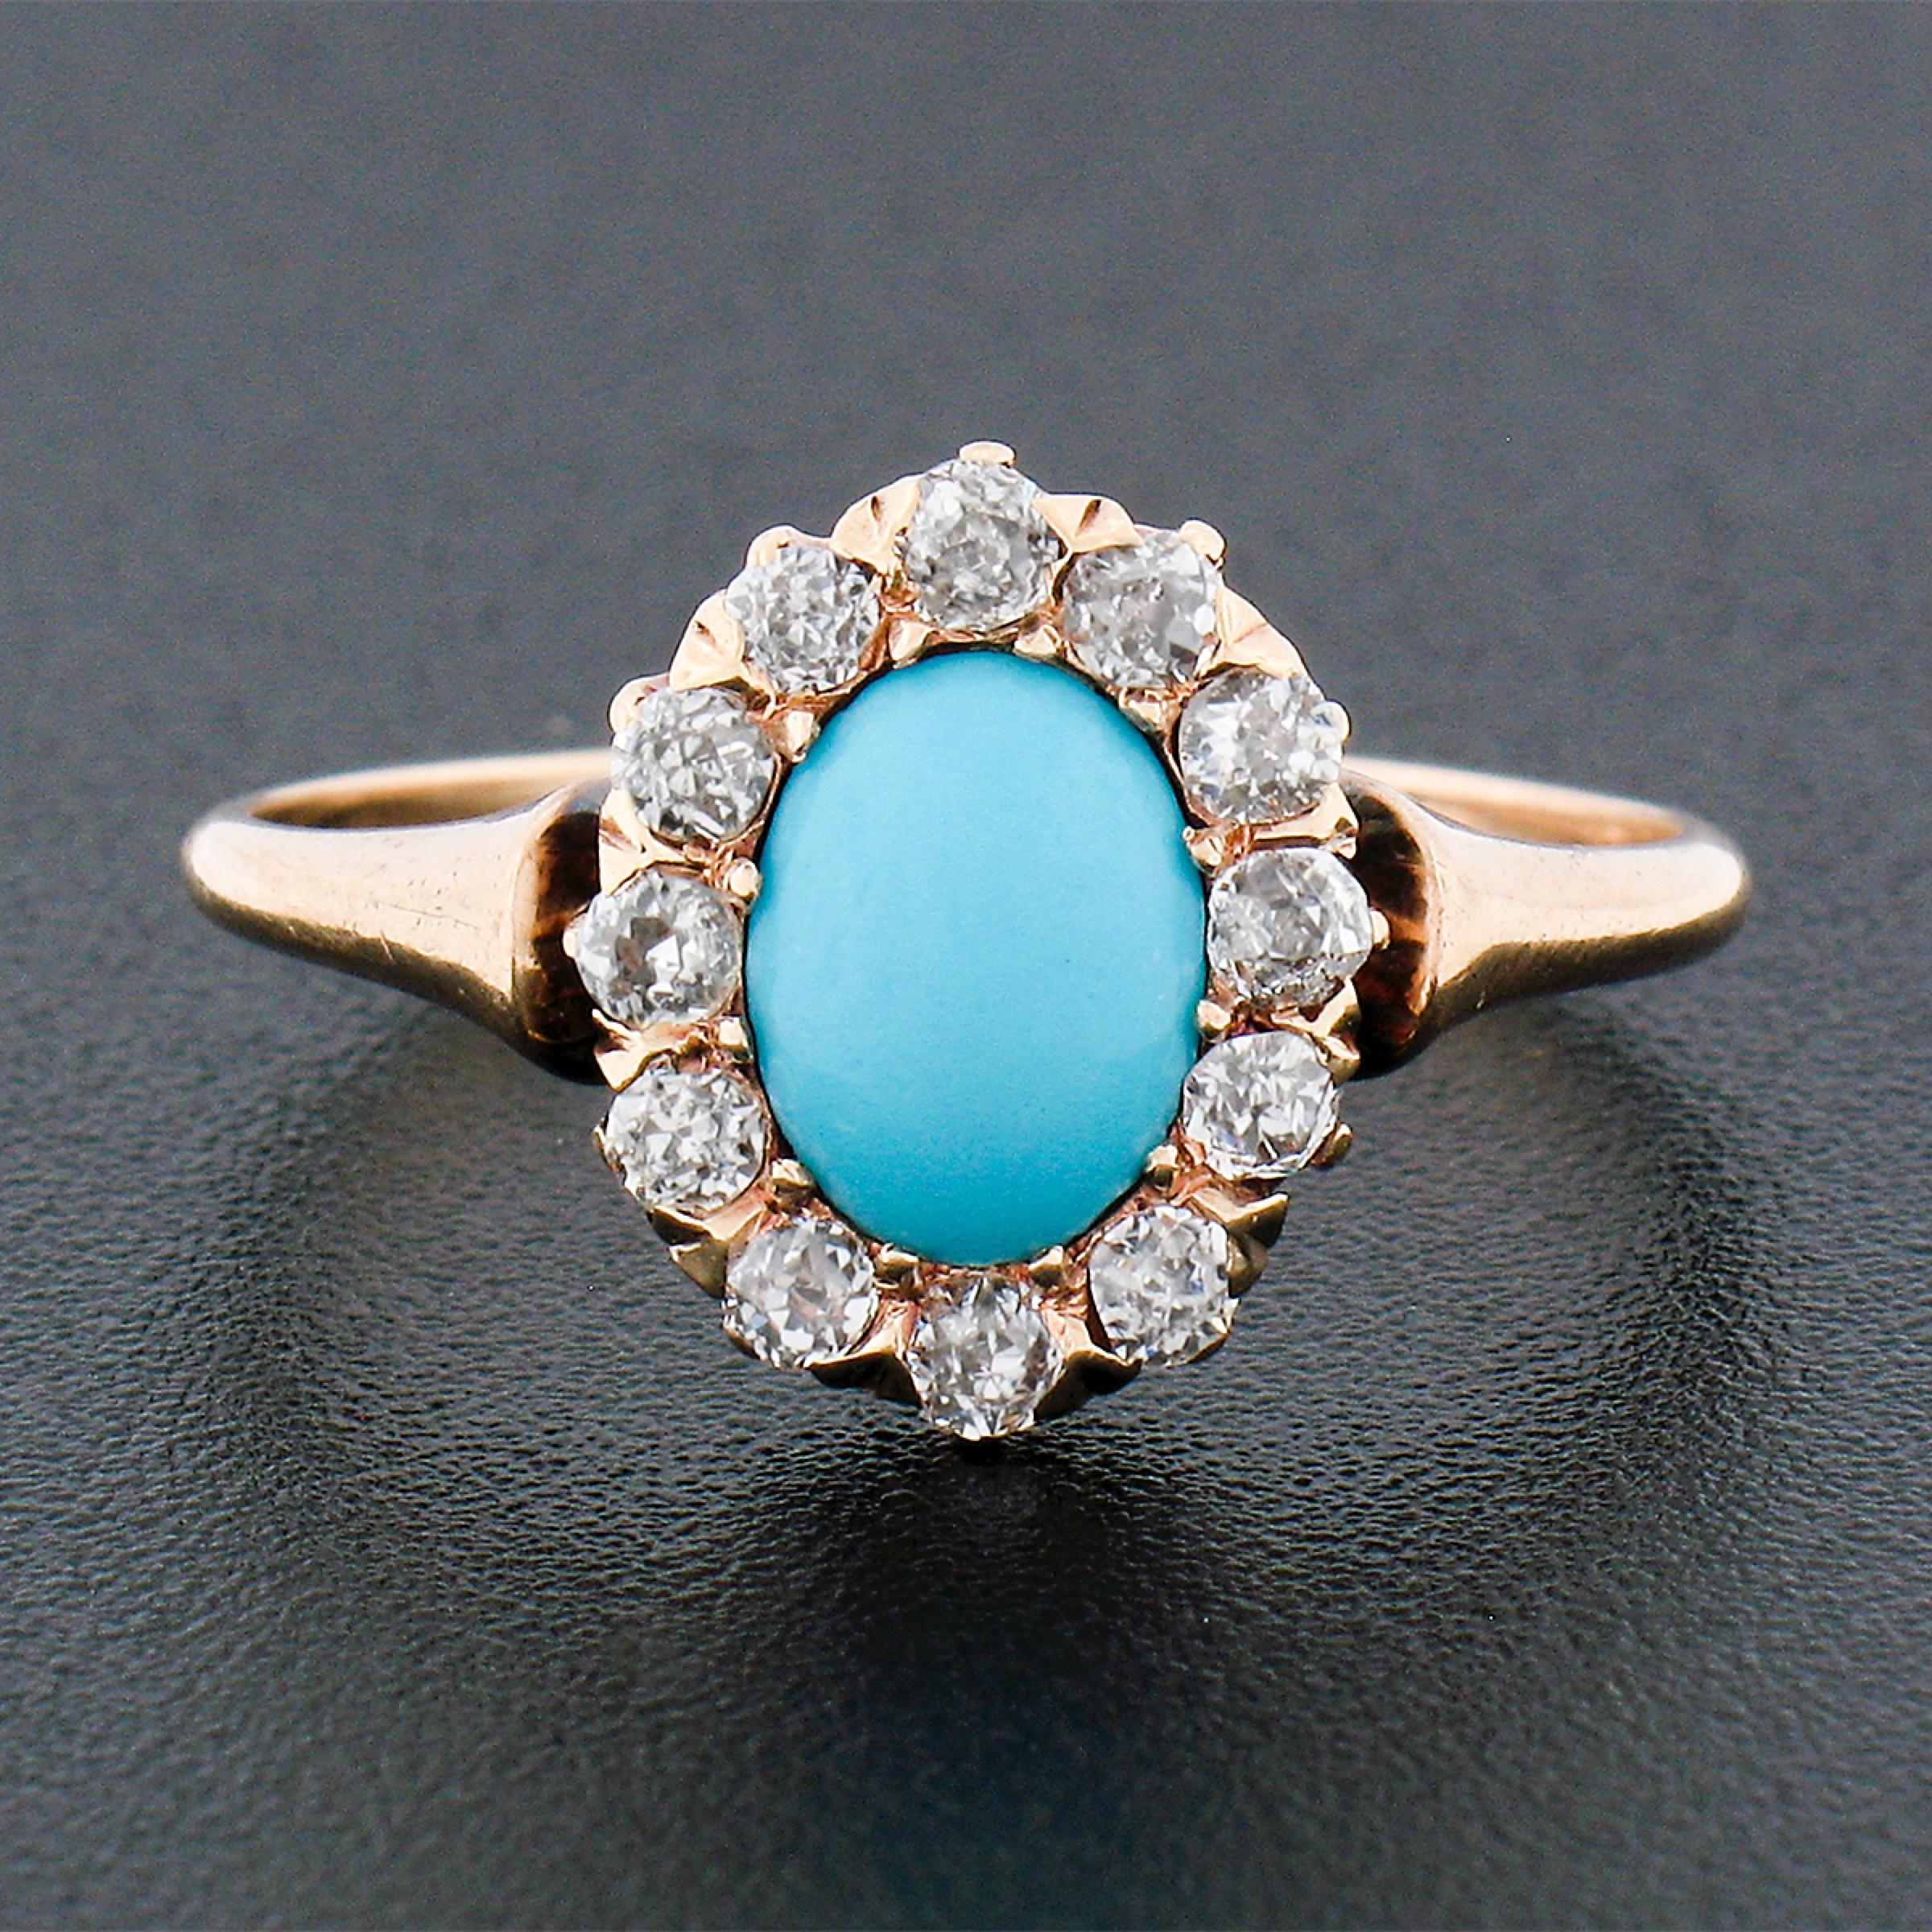 Oval Cut Antique Victorian 14k Gold Oval Cabochon Turquoise w/ Mine Cut Diamond Halo Ring